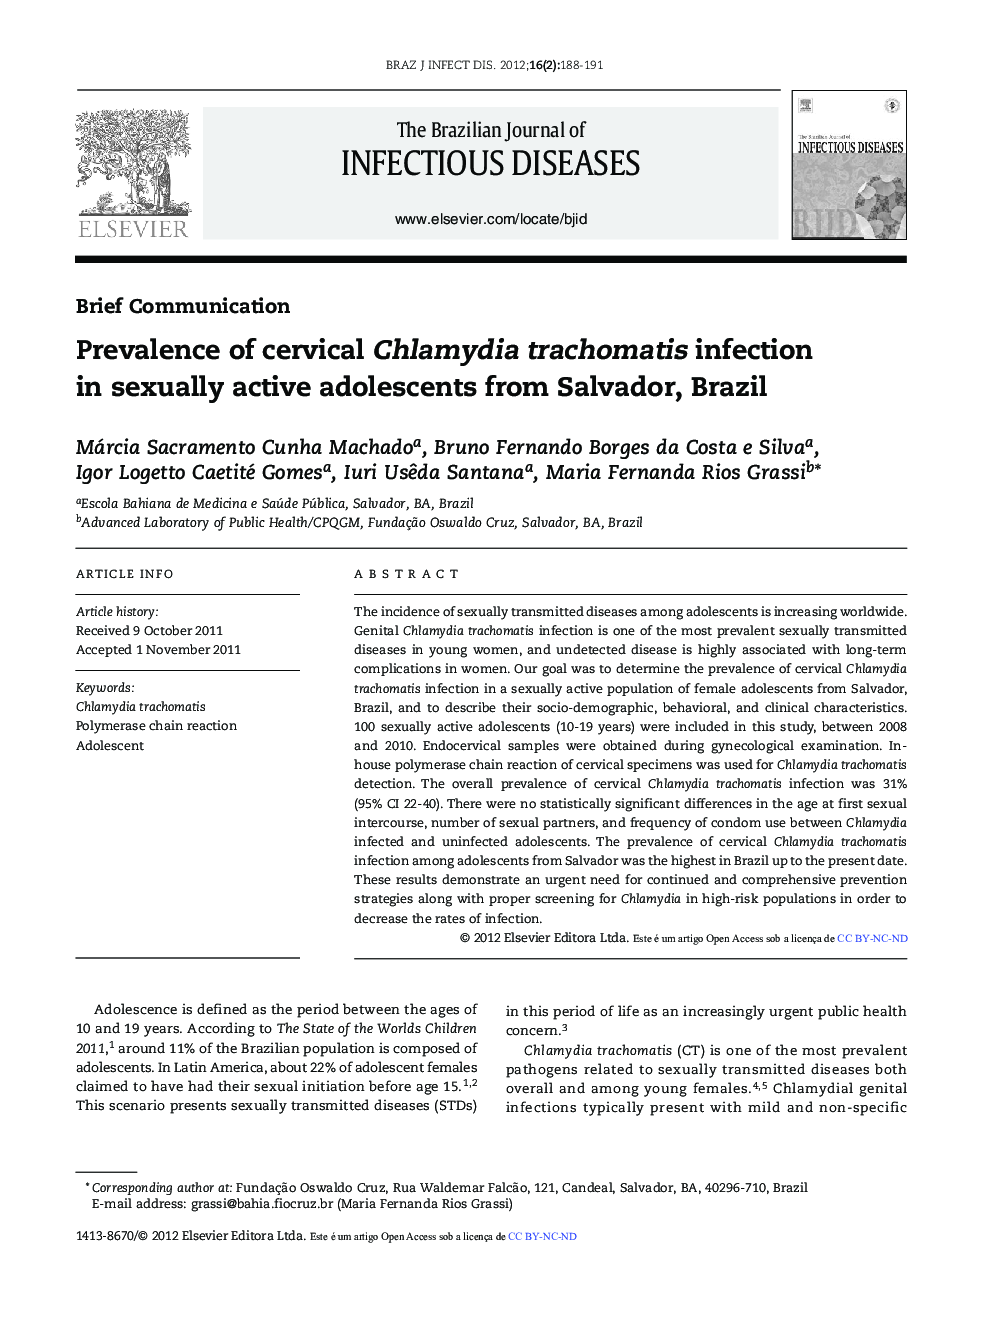 Prevalence of cervical Chlamydia trachomatis infection in sexually active adolescents from Salvador, Brazil